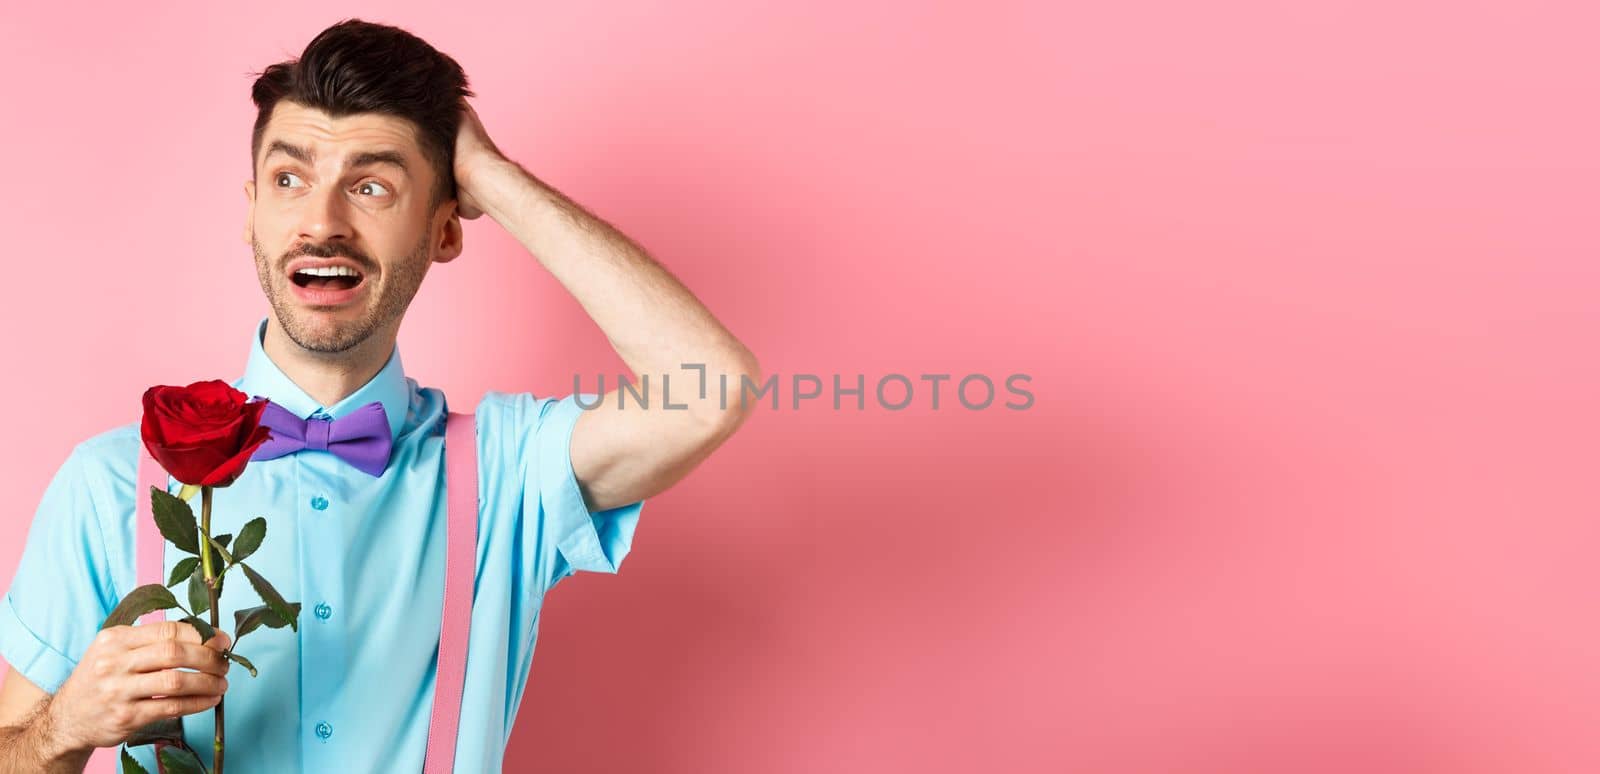 Nervous man waiting for his date on Valentines day, holding red rose and looking confused sideways, scratching head anxiously, standing on pink background.